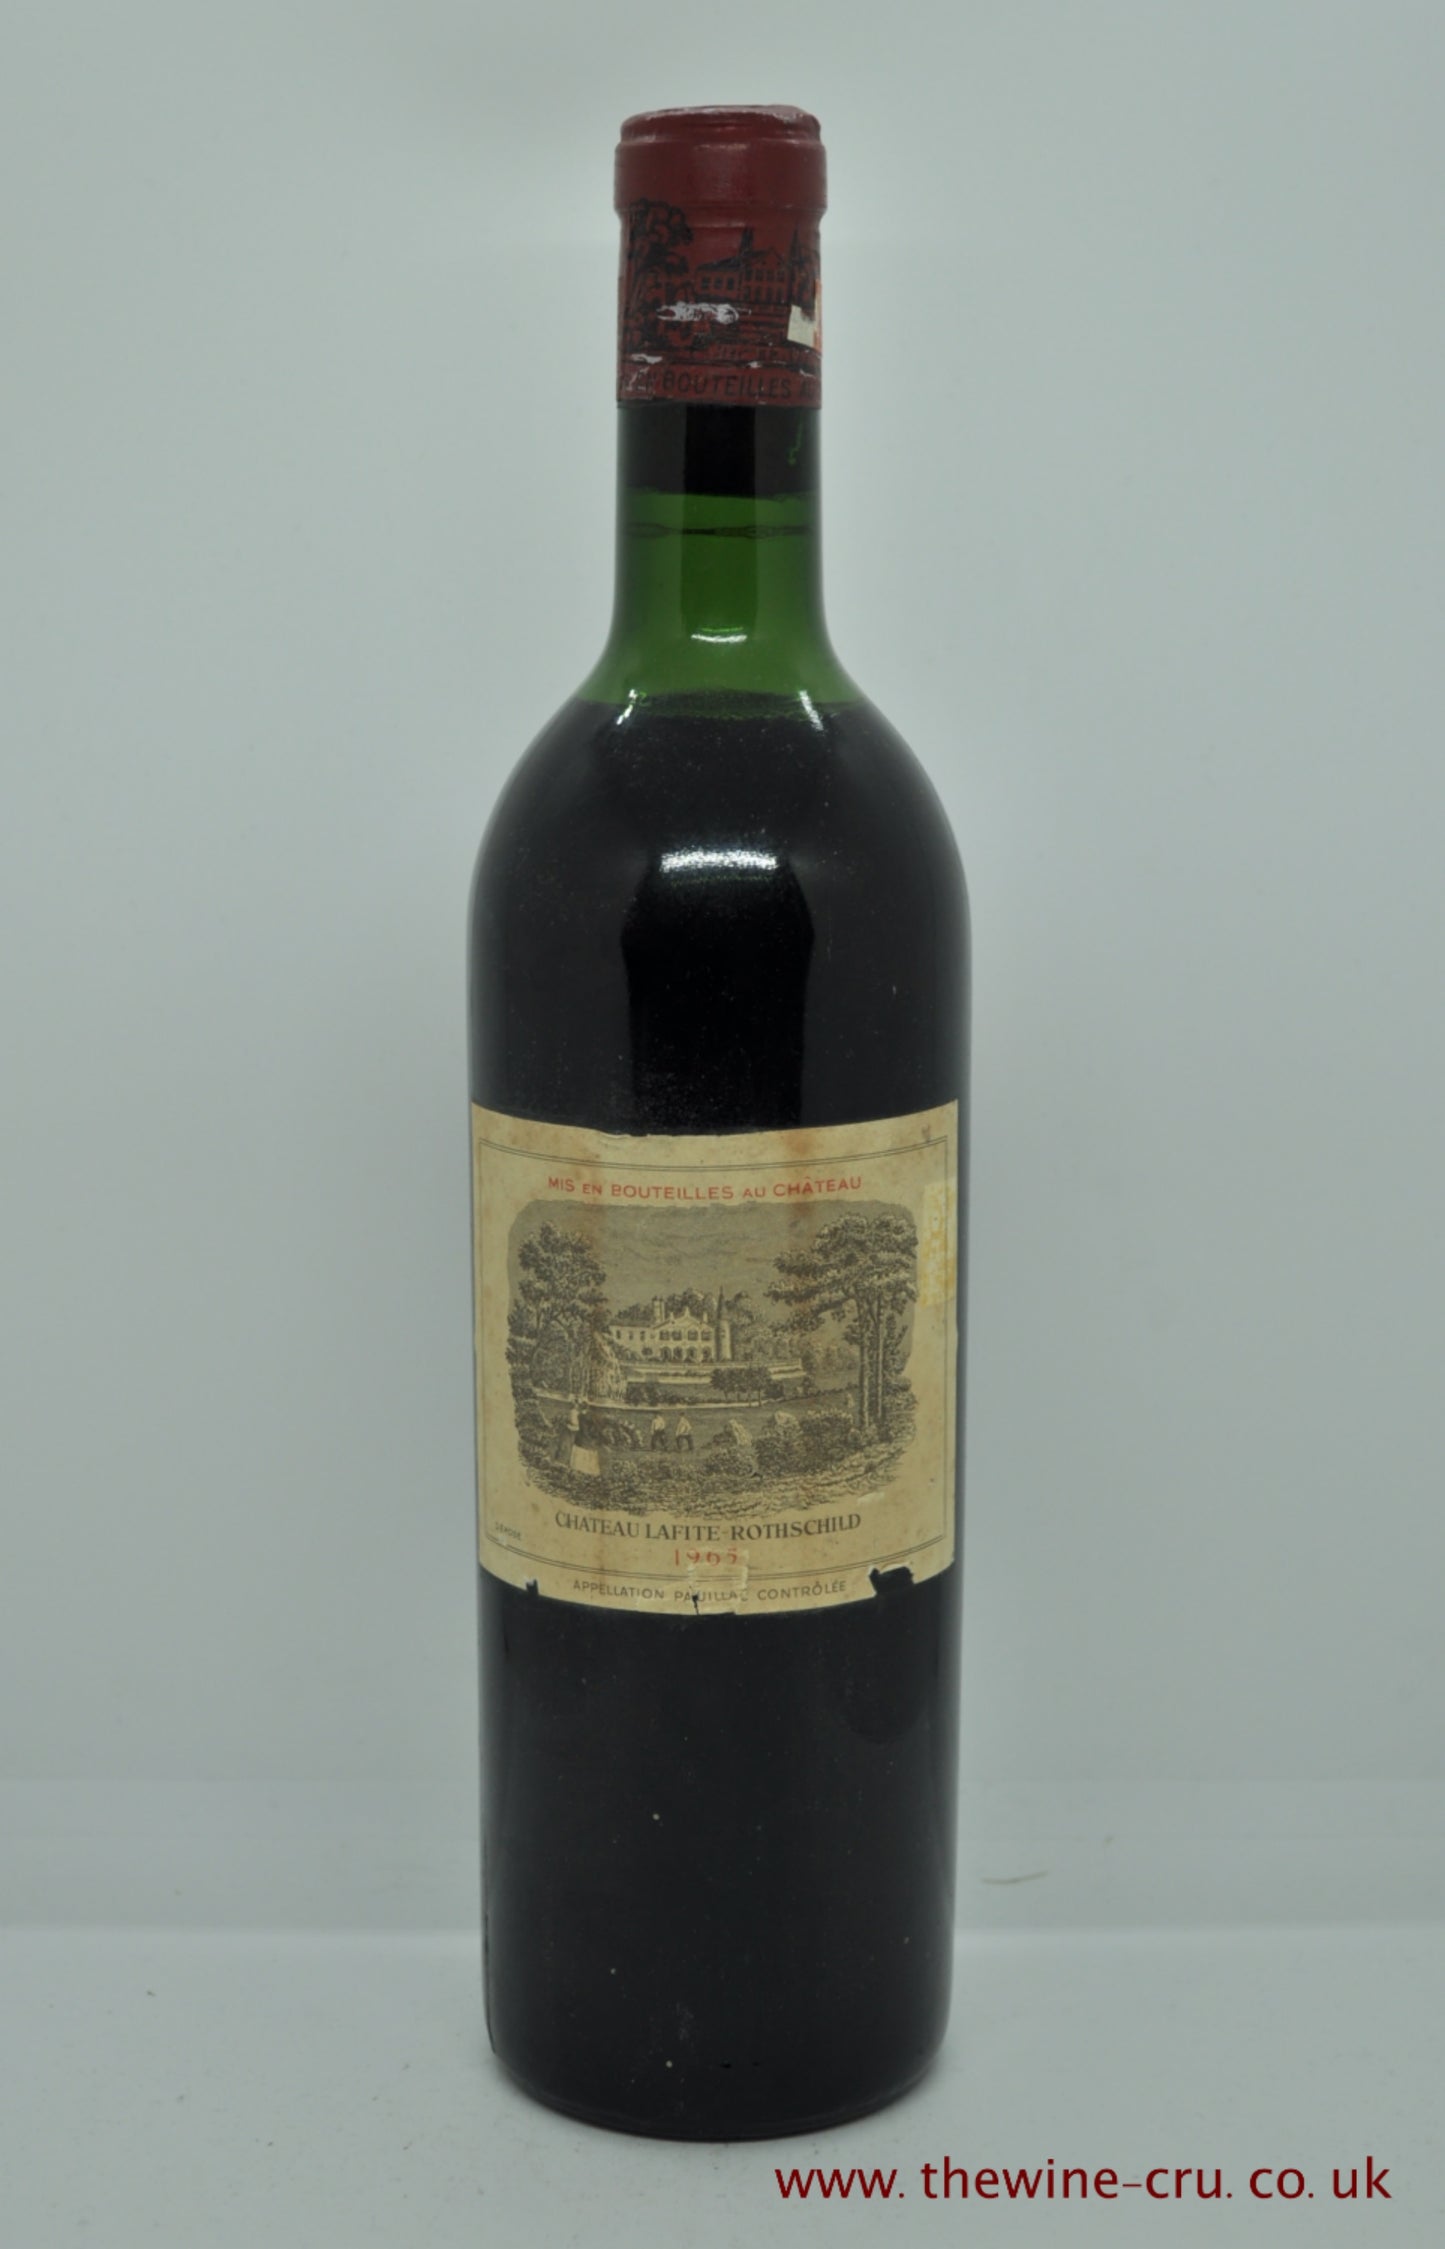 1965 vintage red wine. Chateau Lafite Rothschild. France, Bordeaux. The capsule has a little corrosion and the label has some nicks. The wine level is top shoulder. Immediate delivery. Free local delivery. Gift wrapping available.